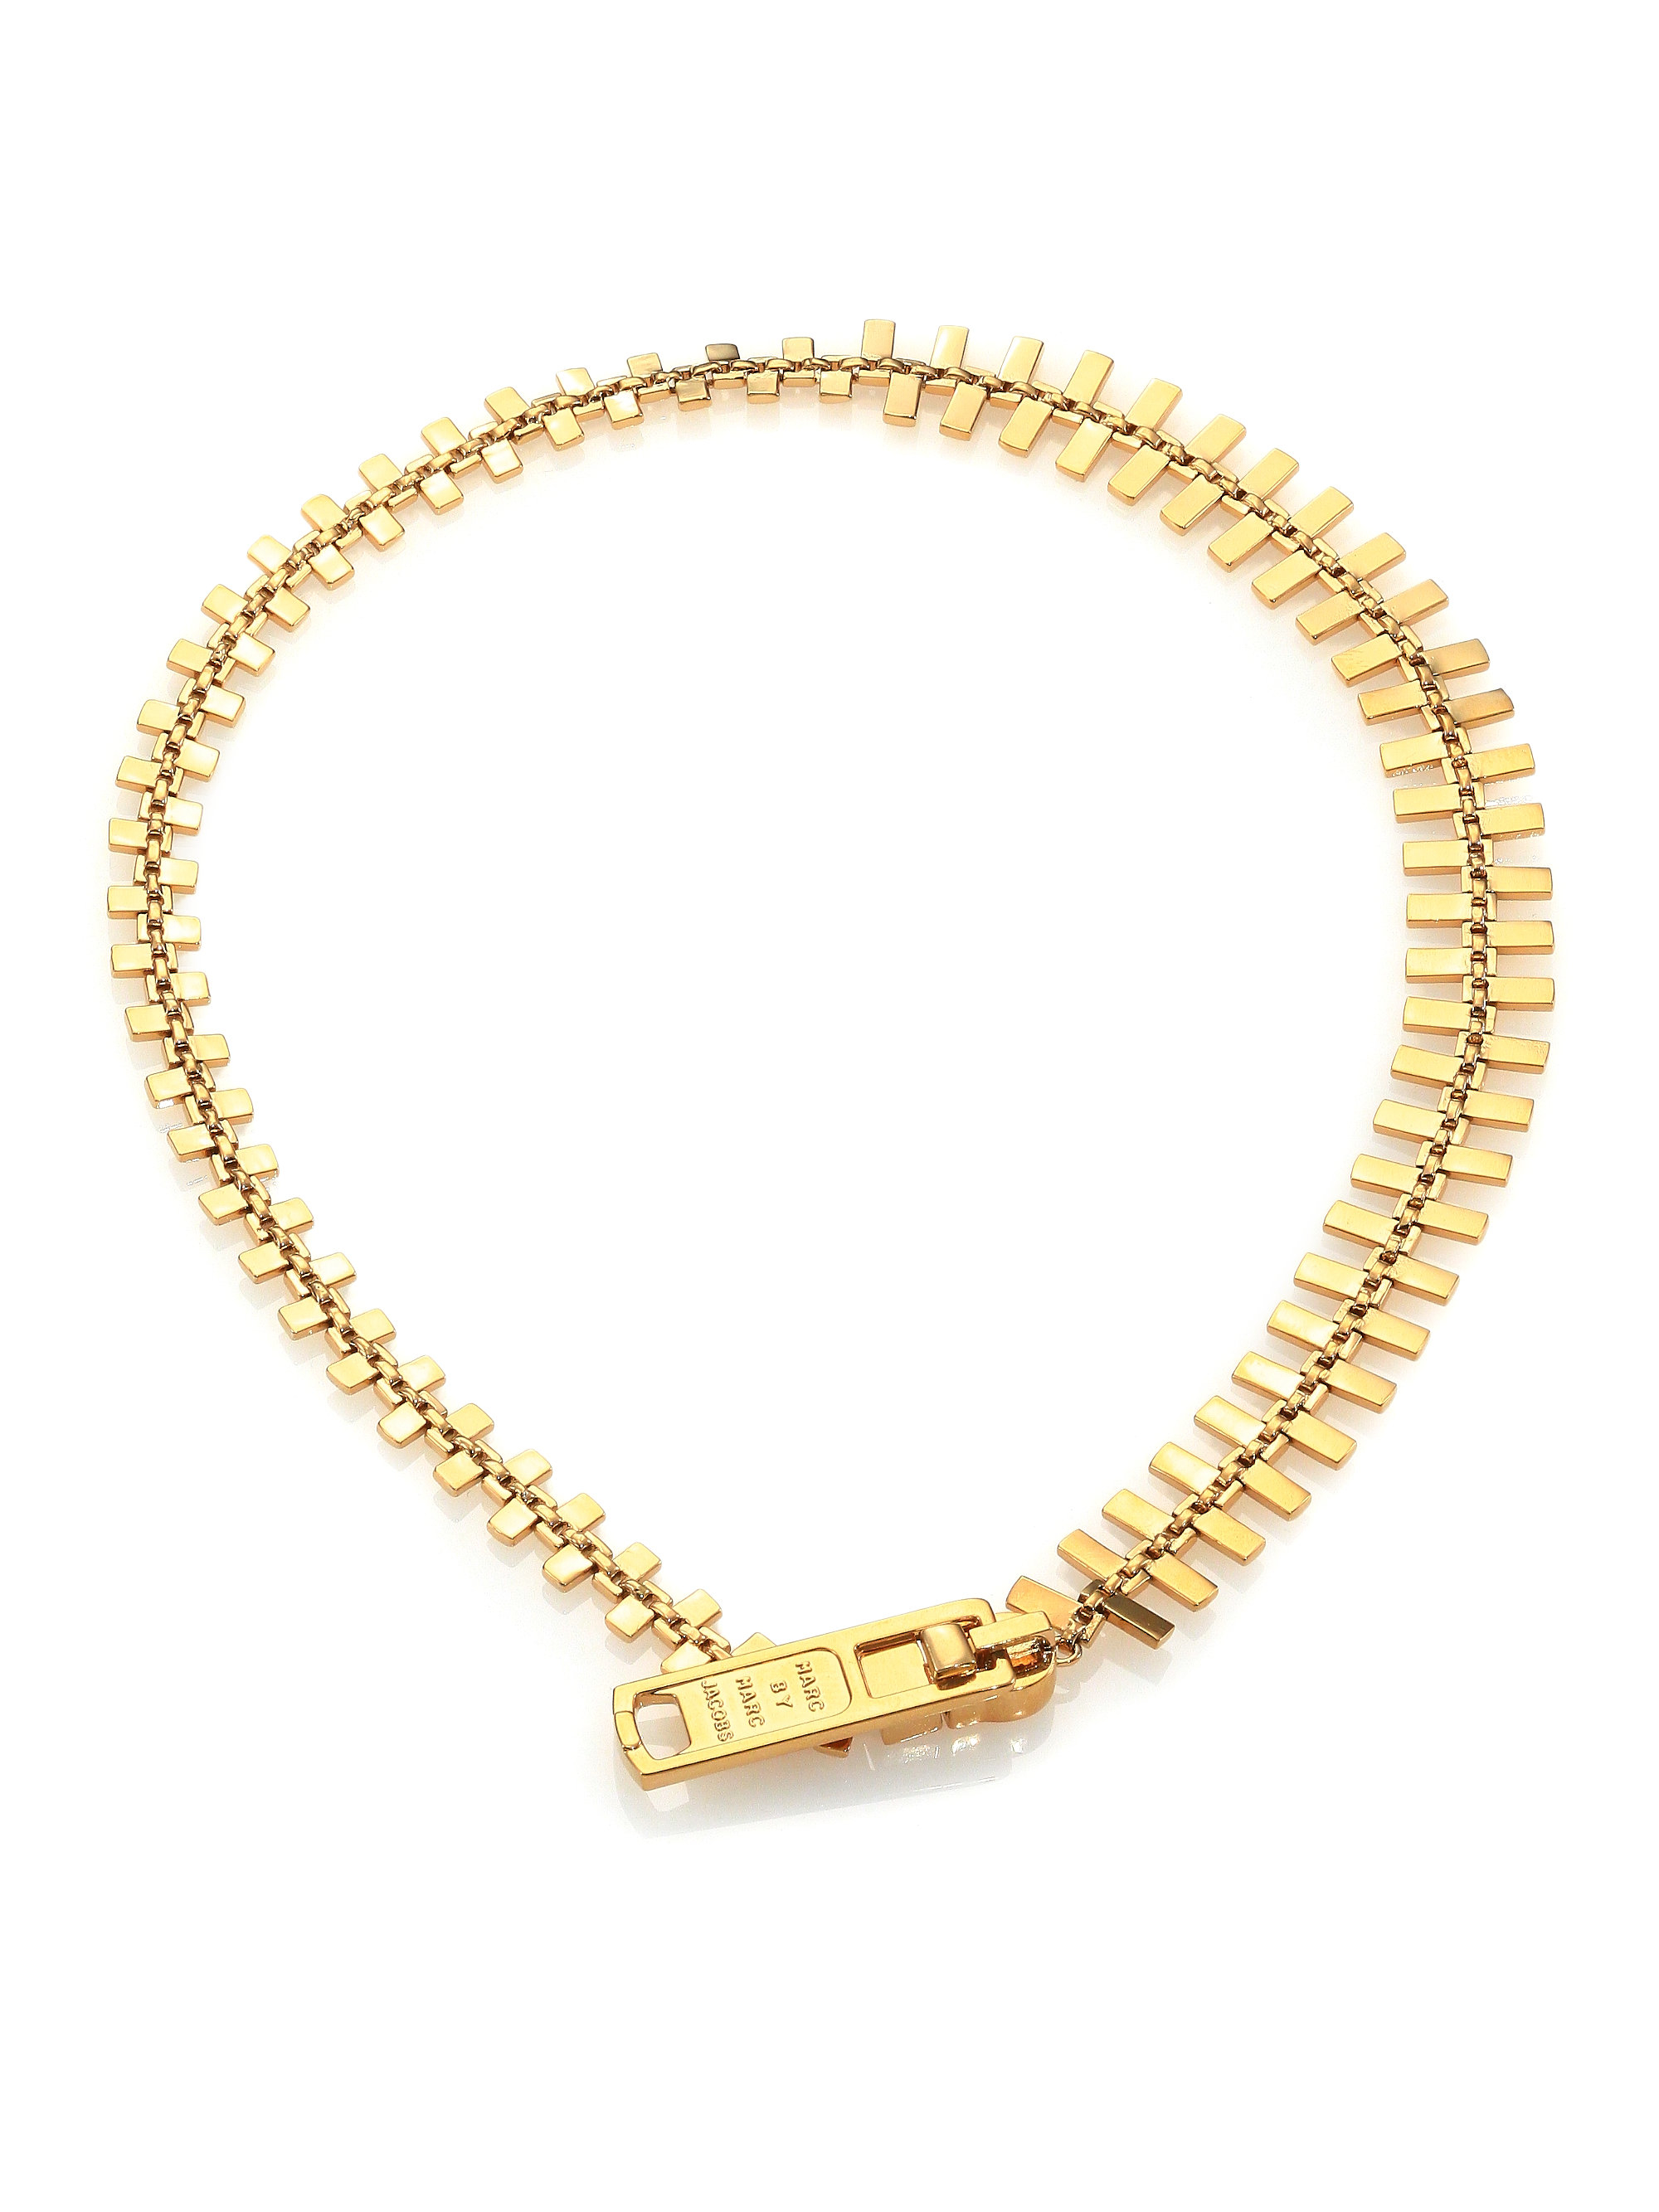 Lyst - Marc By Marc Jacobs Zipper Necklace in Metallic